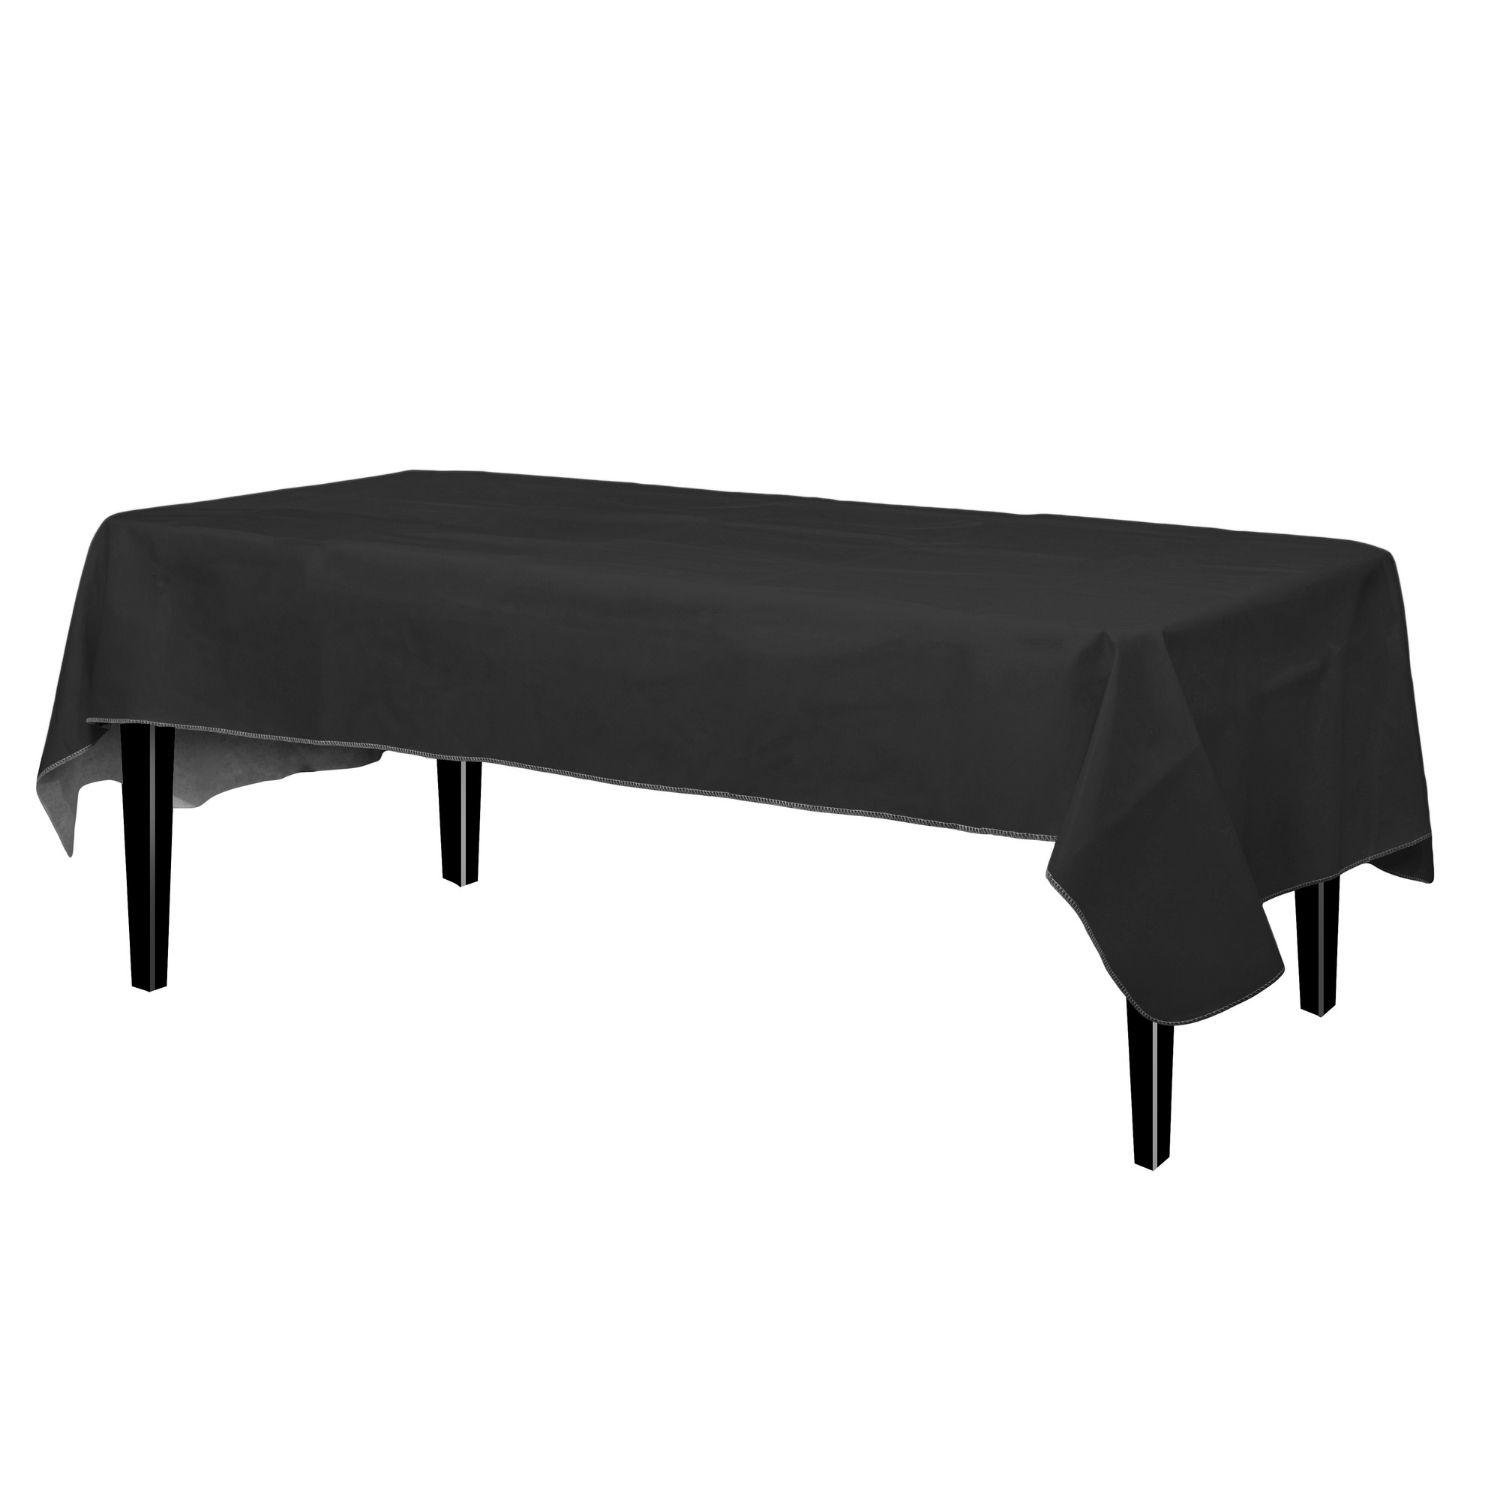 Black Flannel Backed Table Cover 54 in. x 108 in.